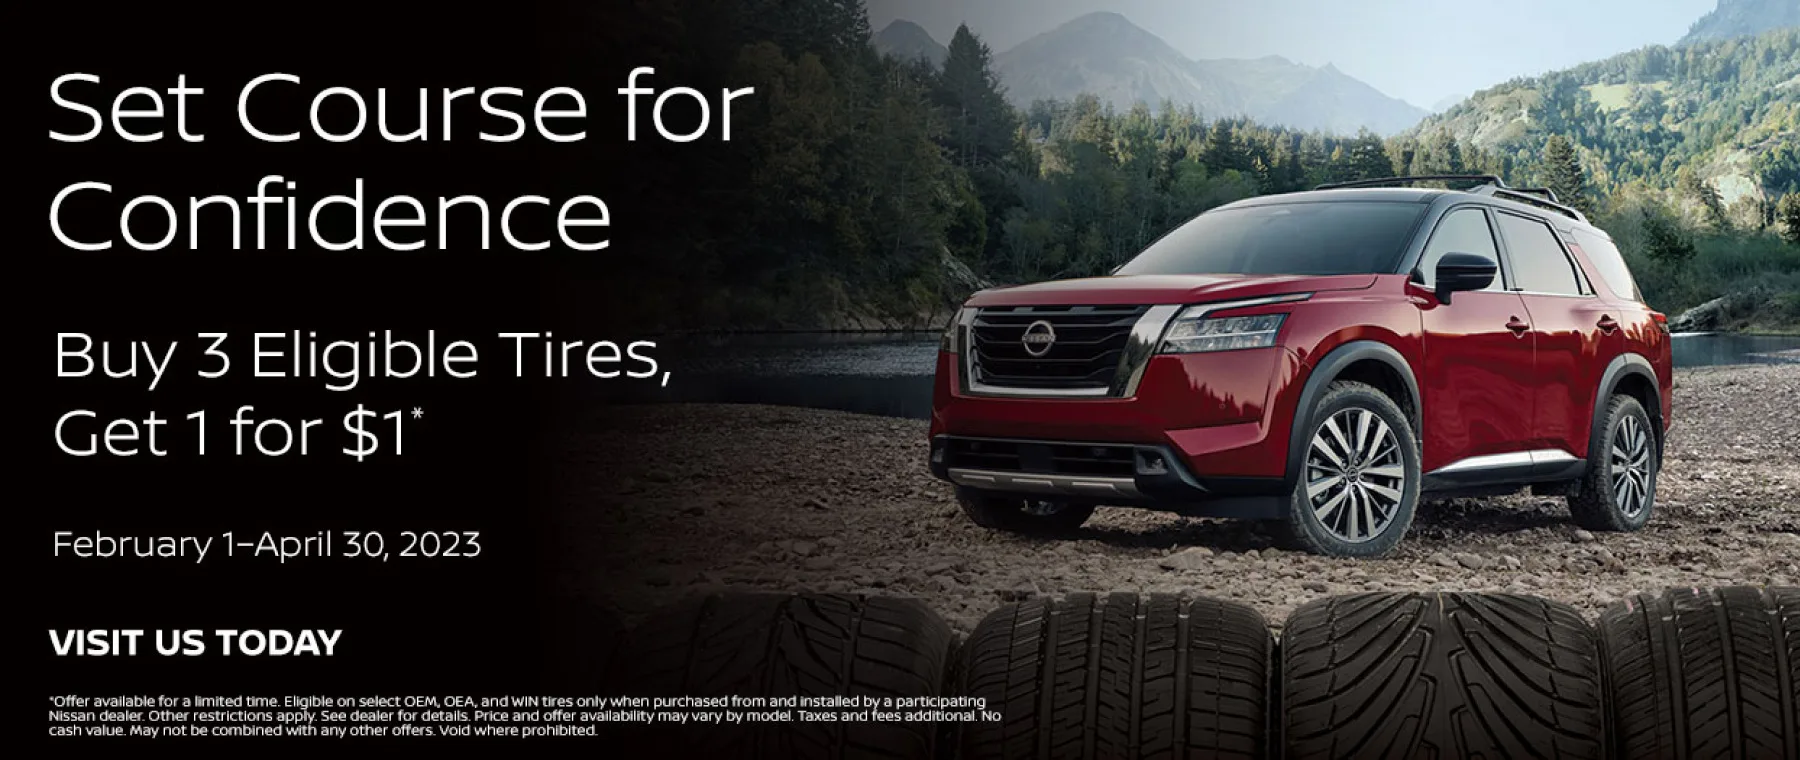  Buy 3 Eligible Tires, Get 1 for $1